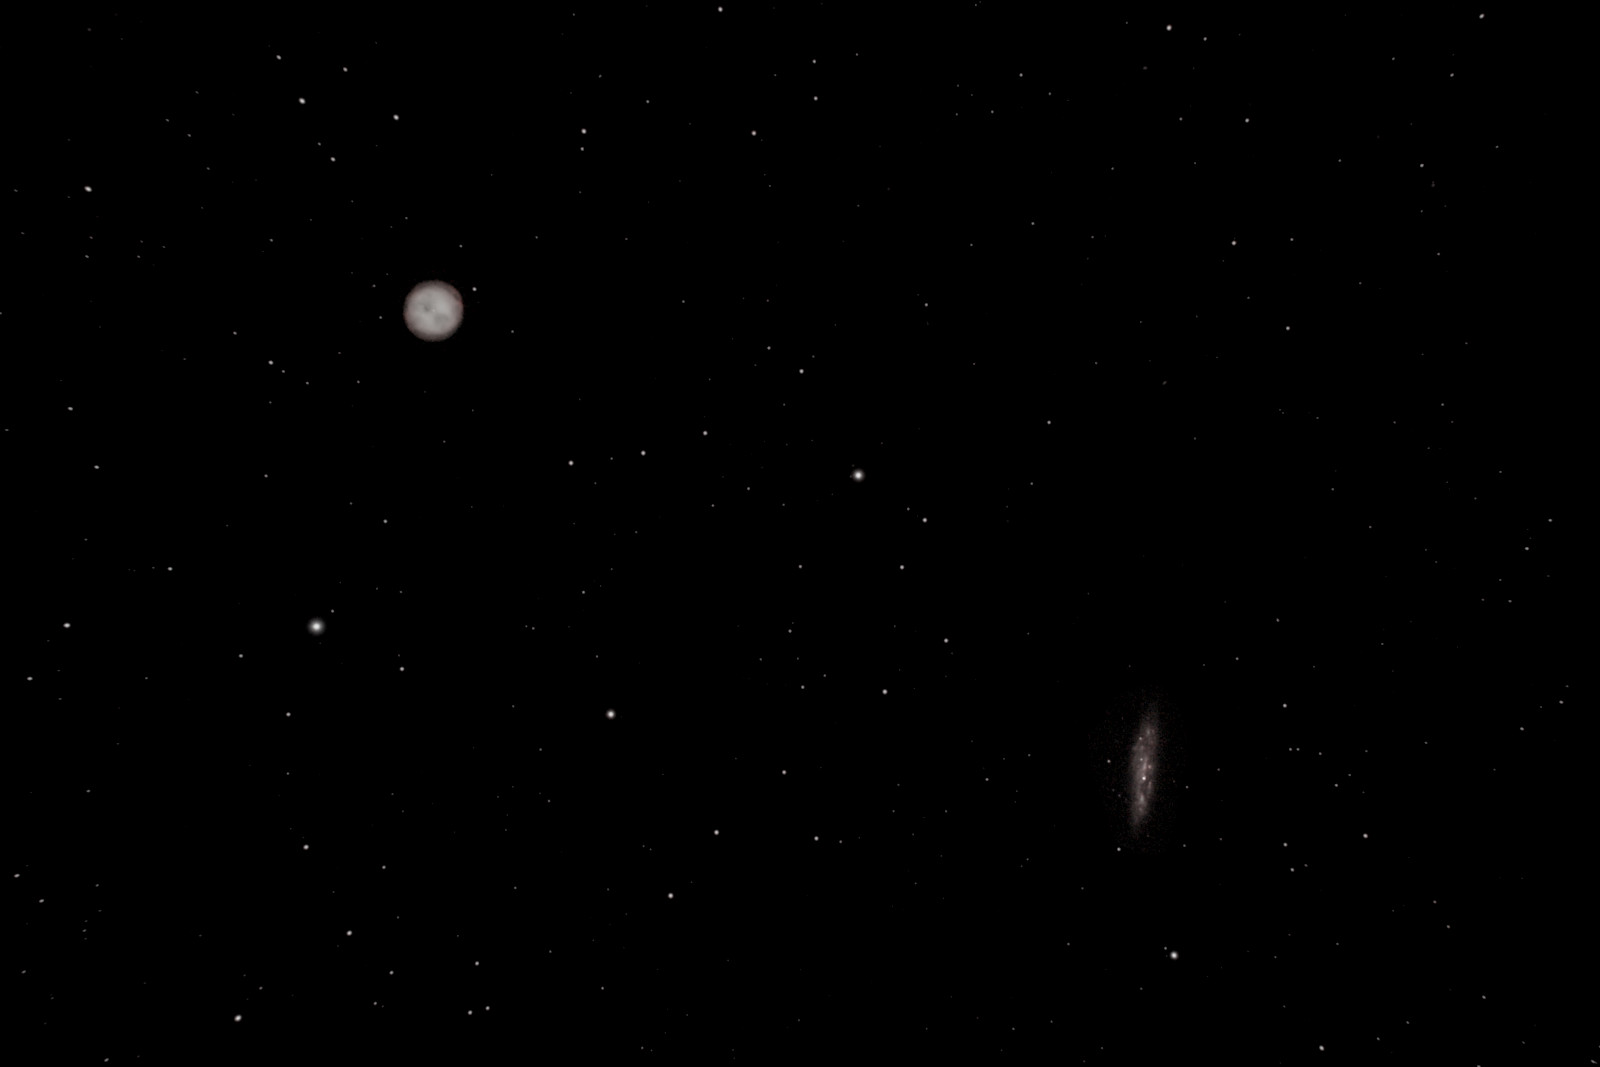 M97 and M108